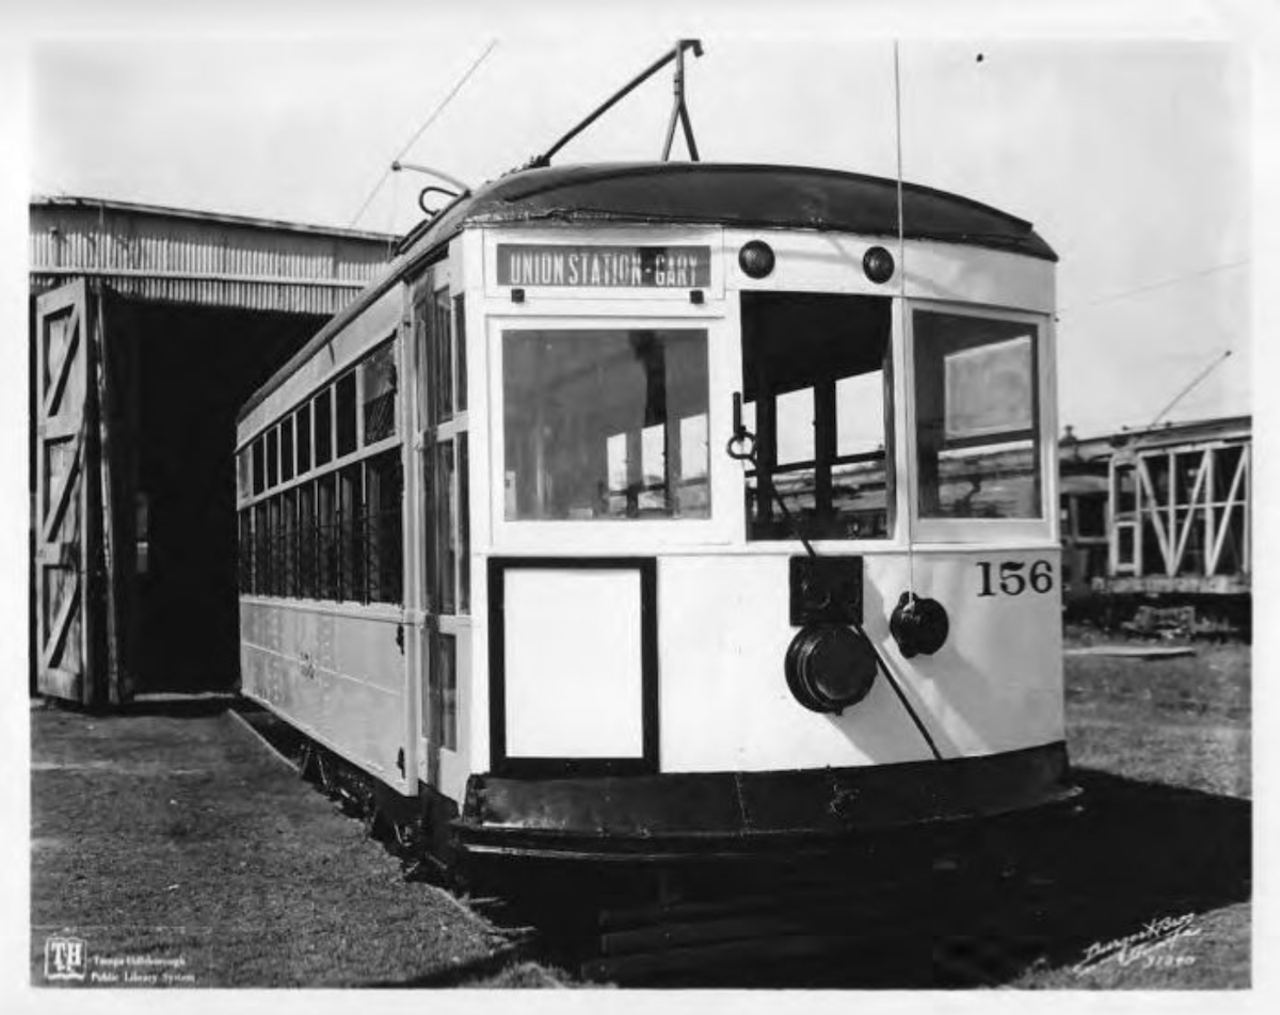 Where did suburban streetcar lines run and why were they removed?